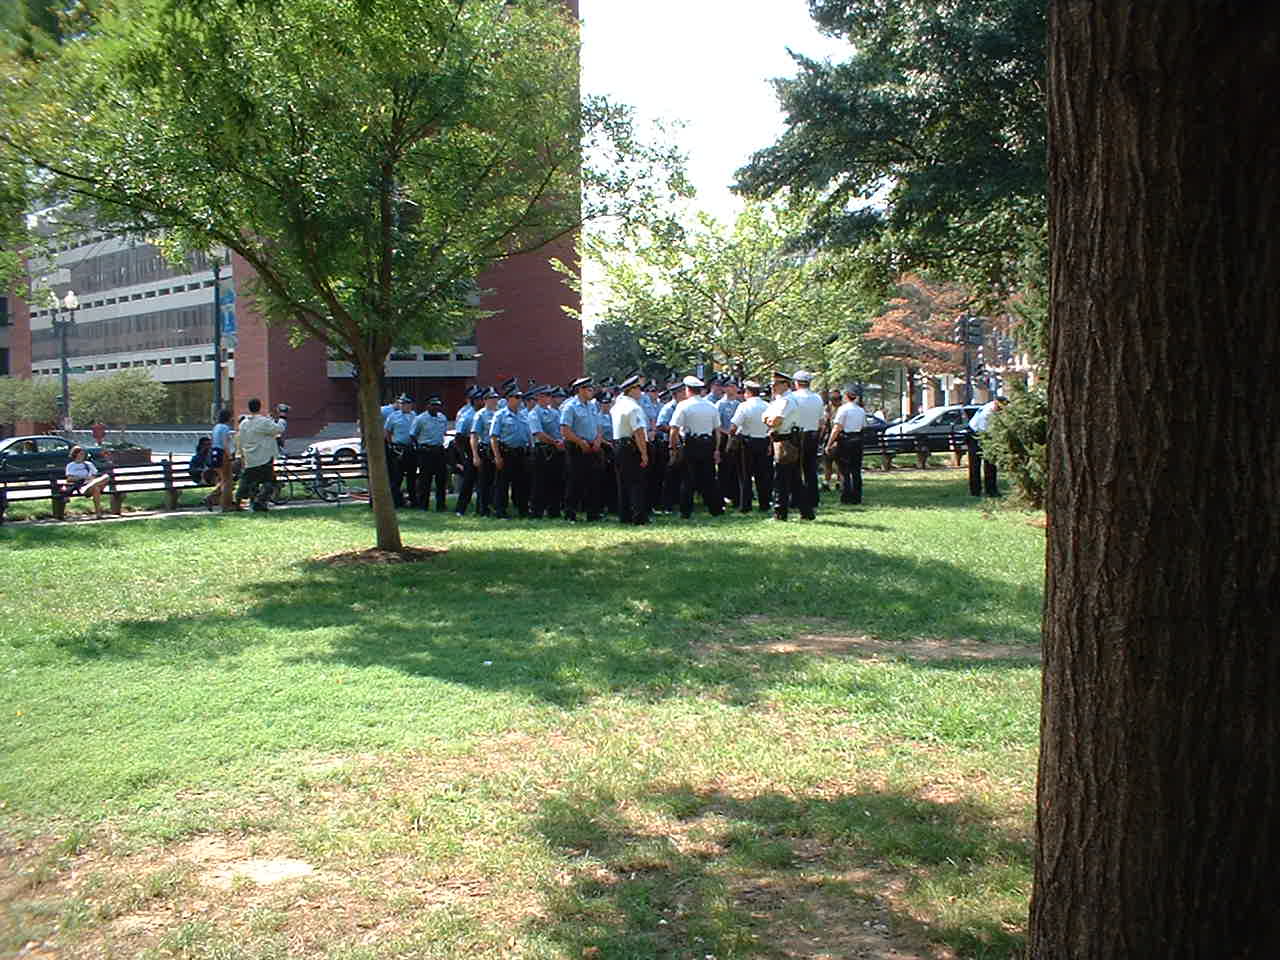 Police assemble on lawn